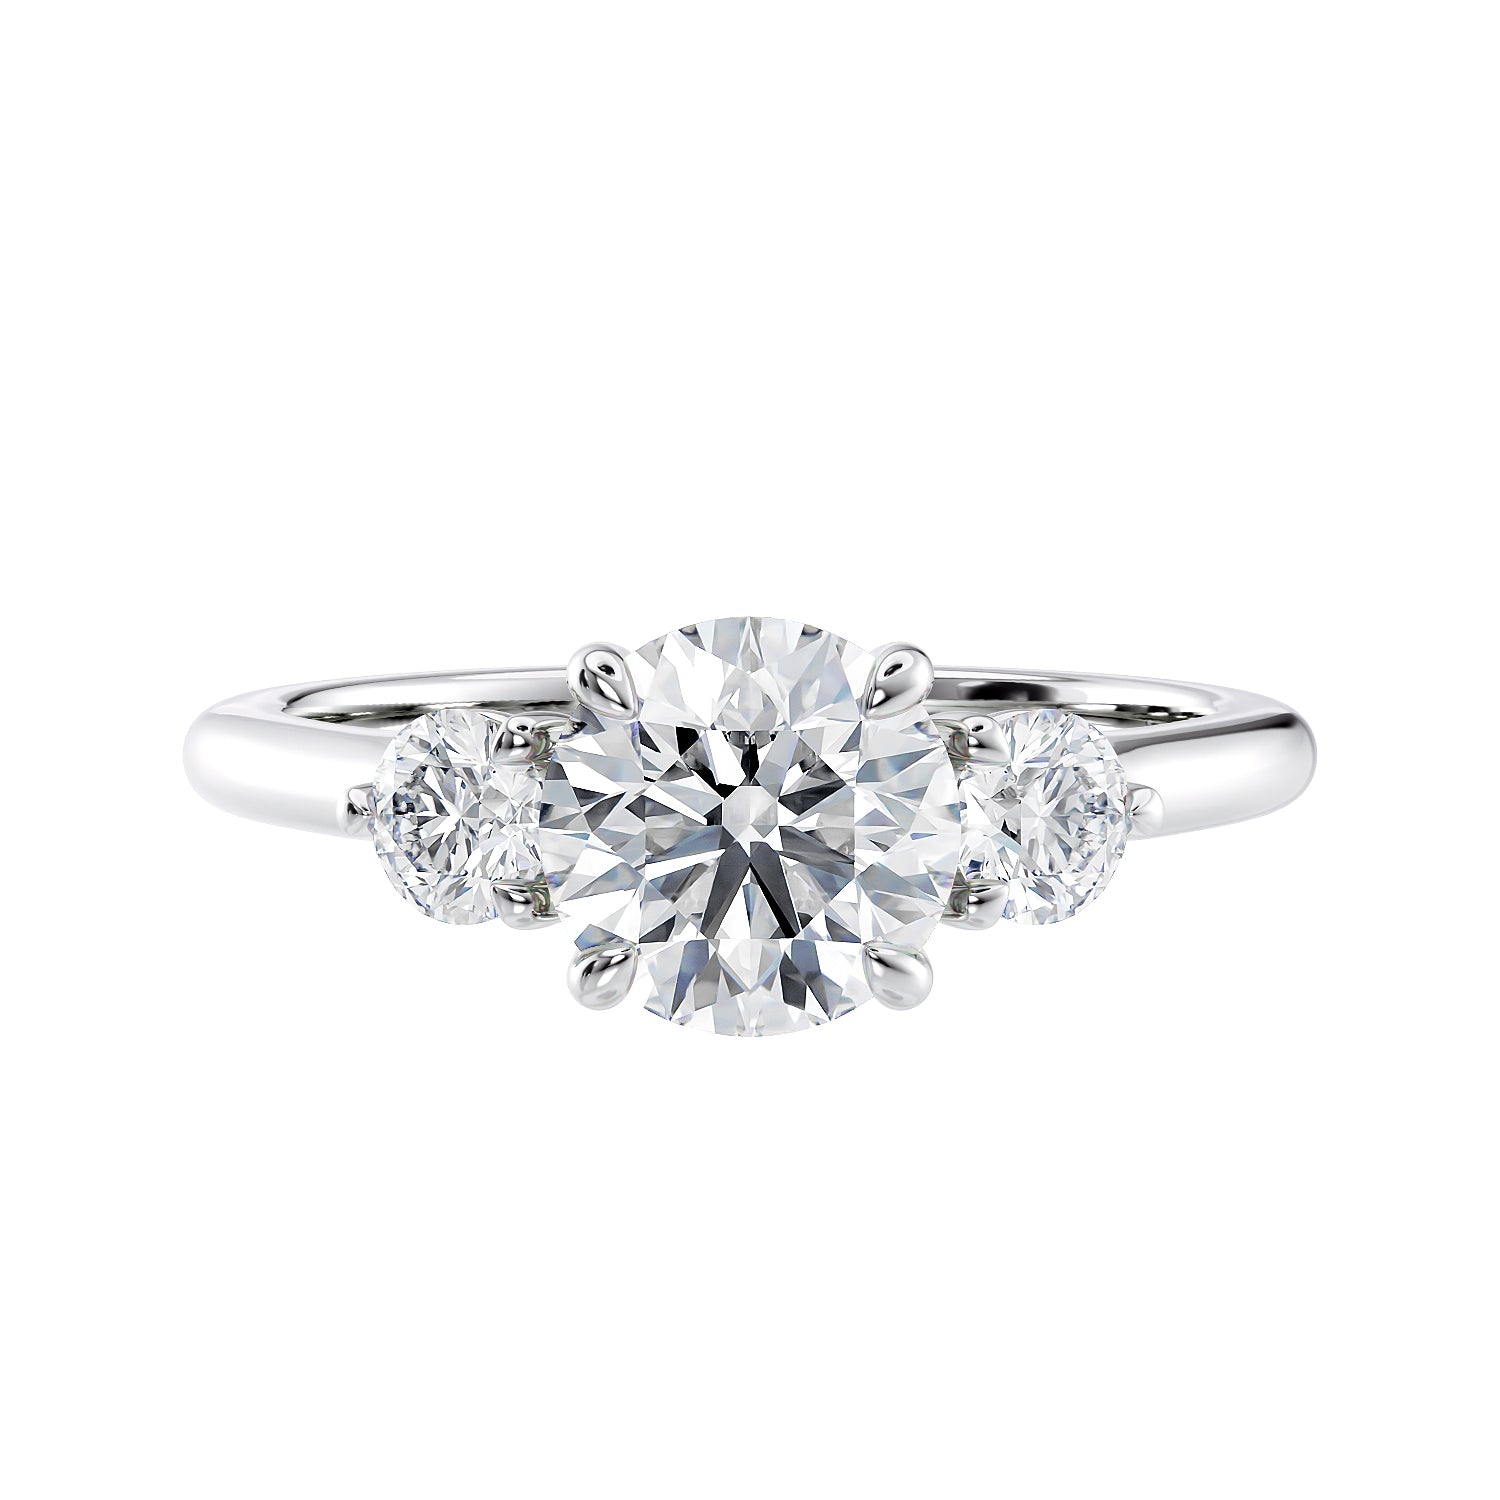 Lab grown diamond 3 stone engagement ring with small side diamonds white gold front view.